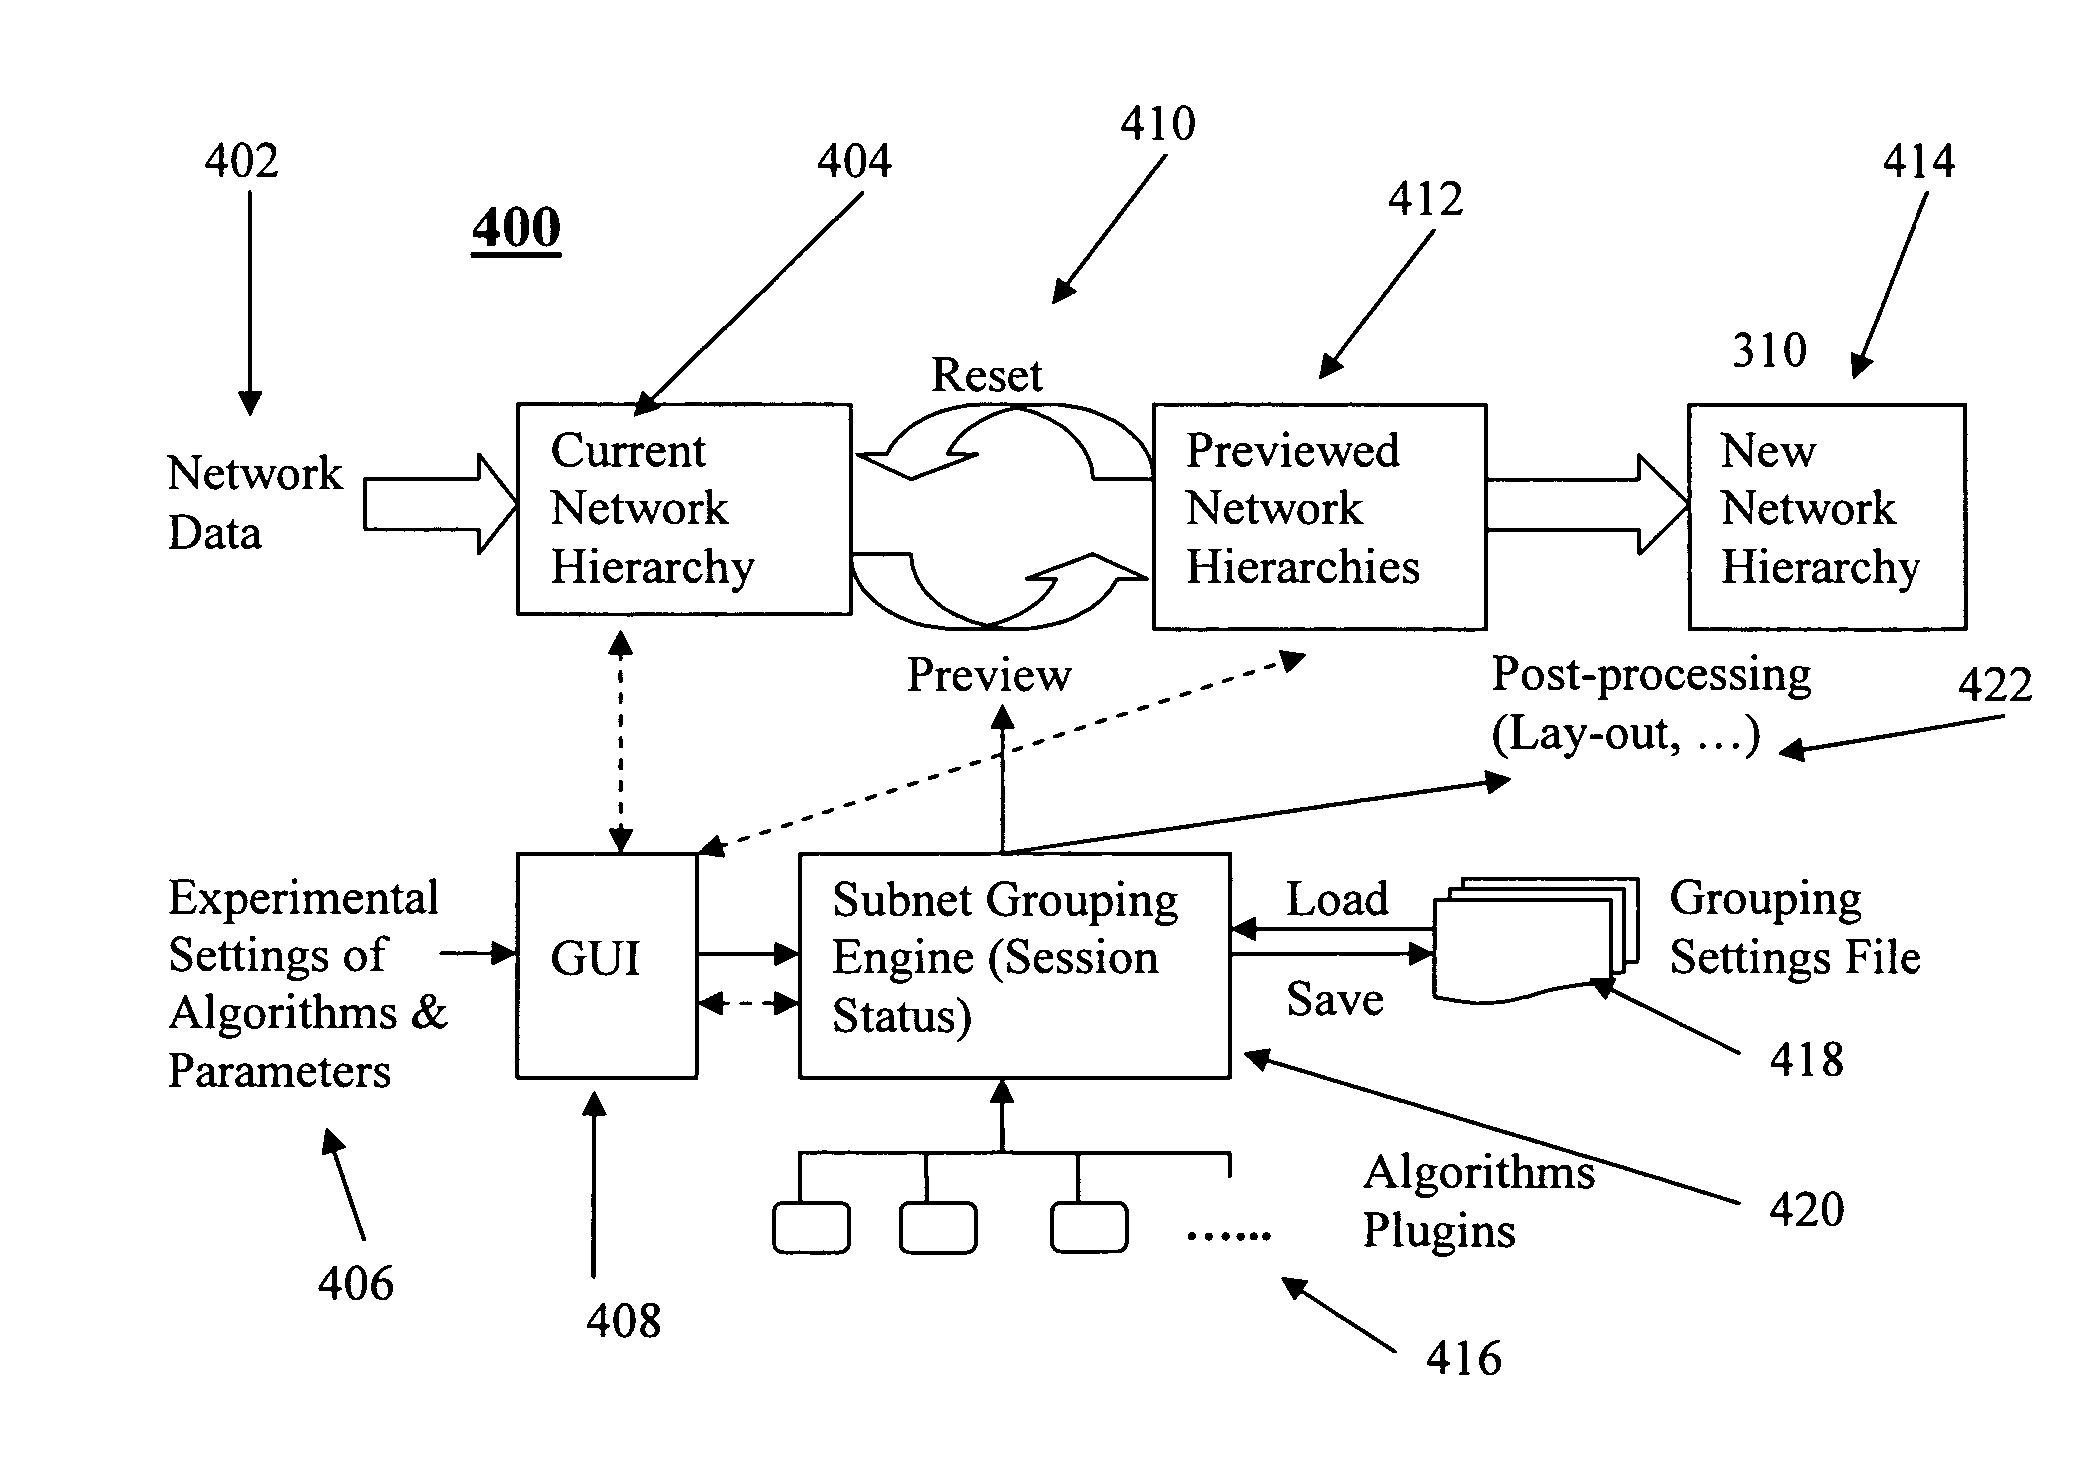 Generation of a network topology hierarchy